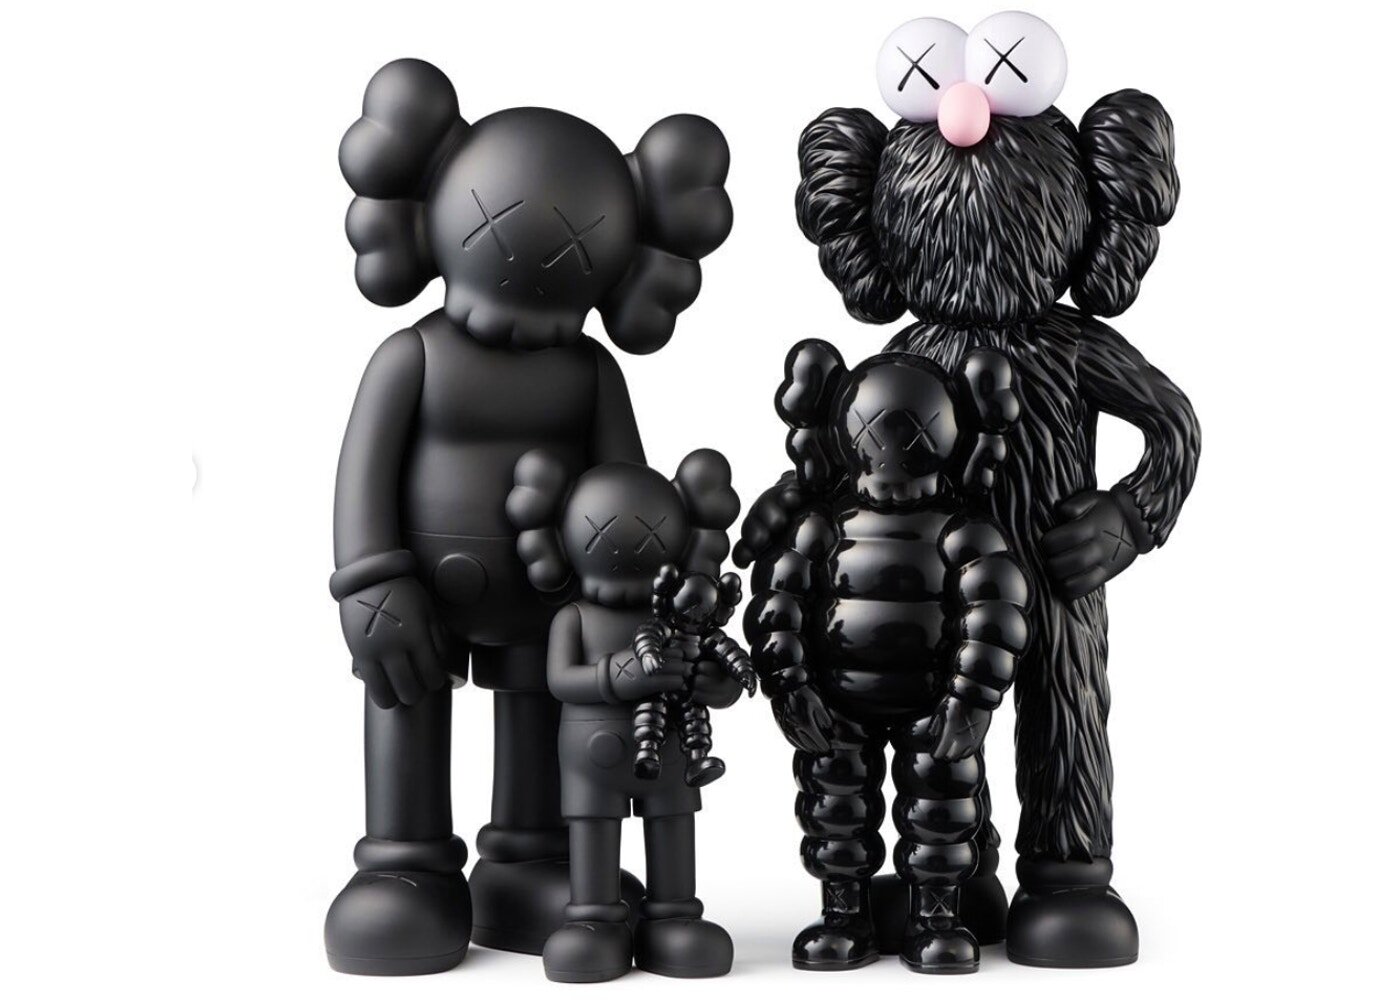 Kaws - Authentic vinyl toys, prints and other limited editions